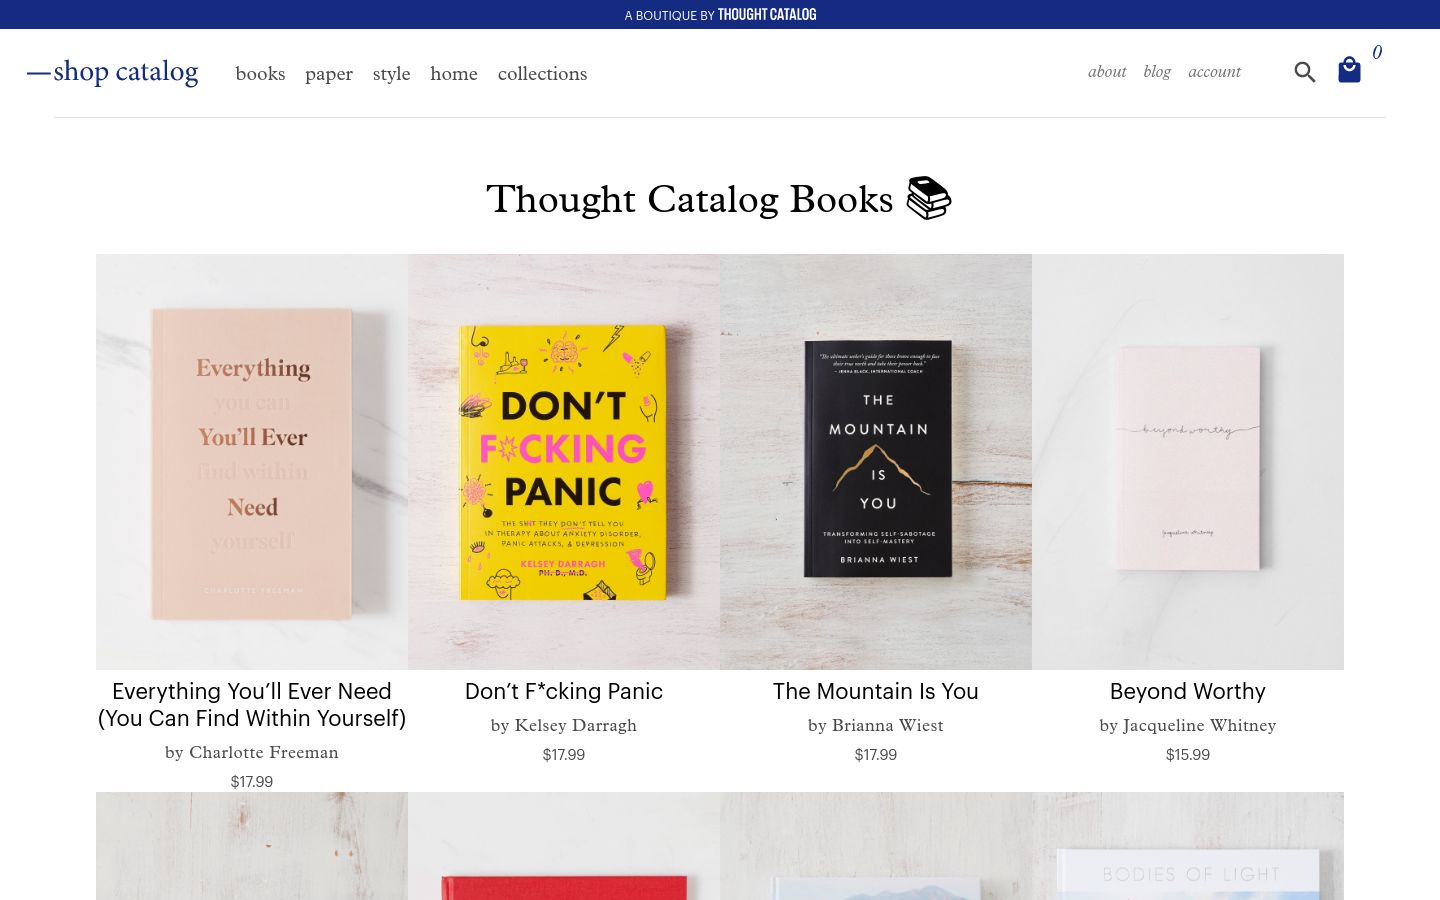 Thought Catalog Books